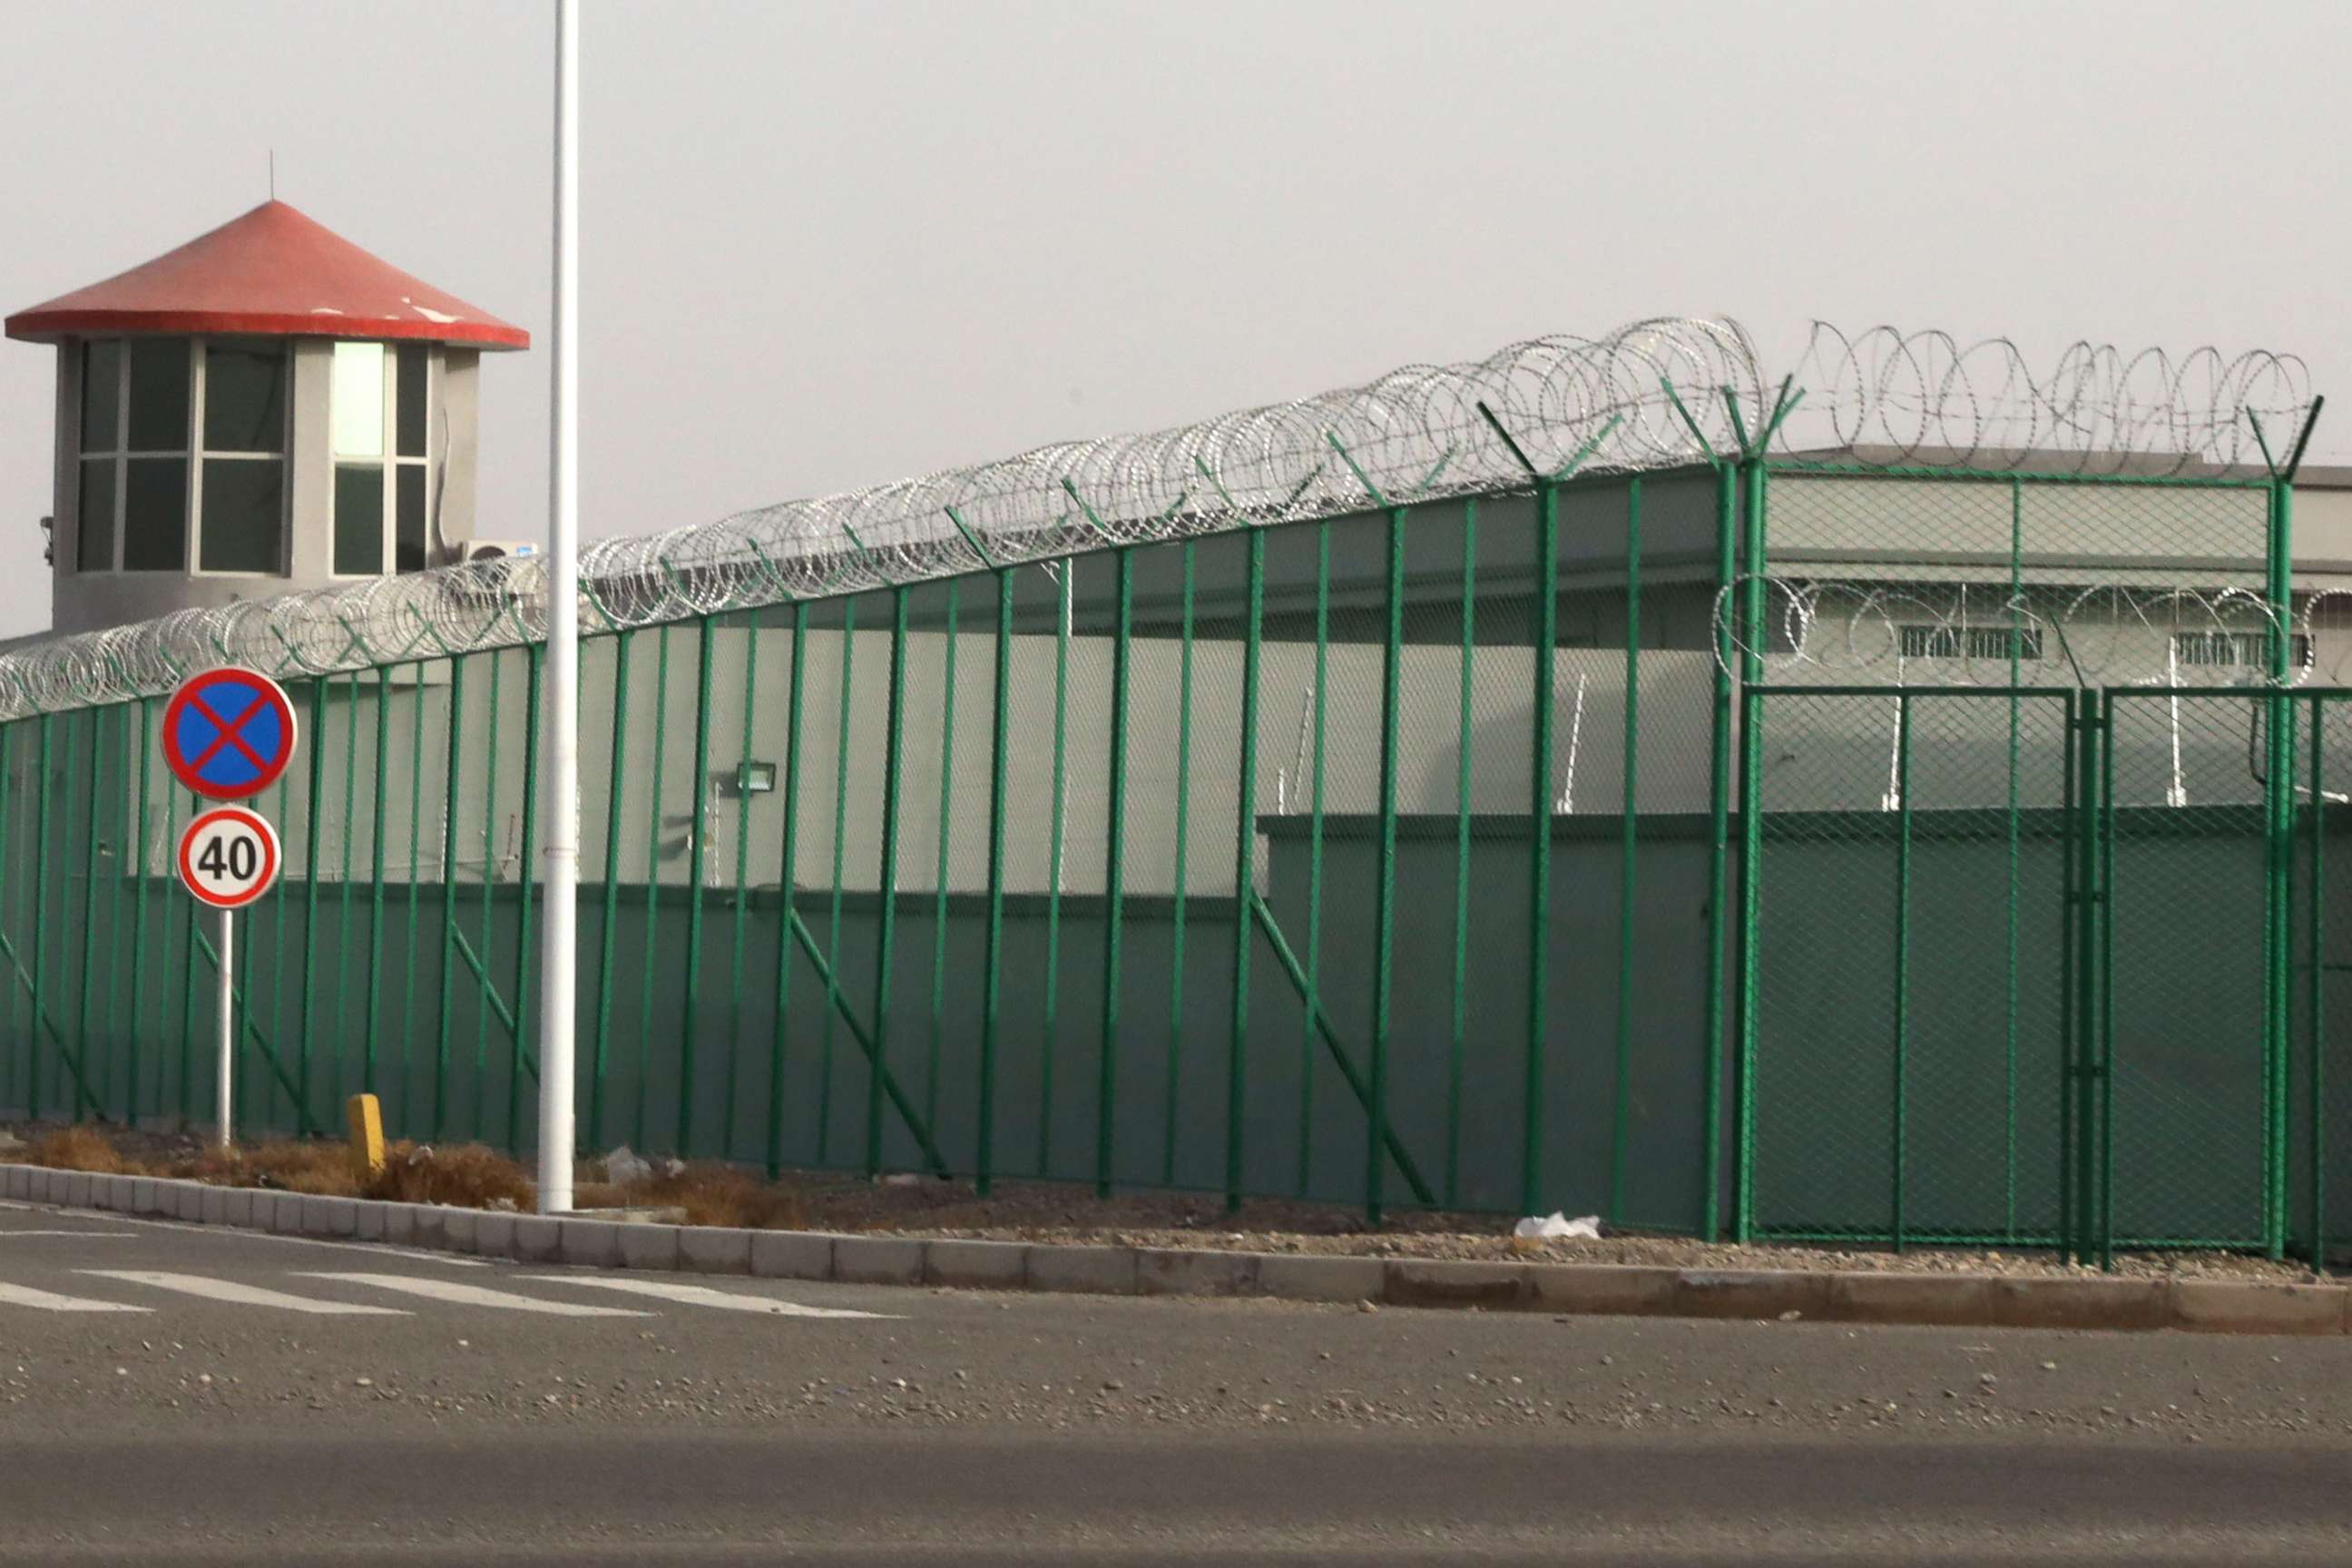 PHOTO: In this Dec. 3, 2018, file photo, a guard tower and barbed wire fence surround a detention facility in the Kunshan Industrial Park in Artux in western China's Xinjiang region.